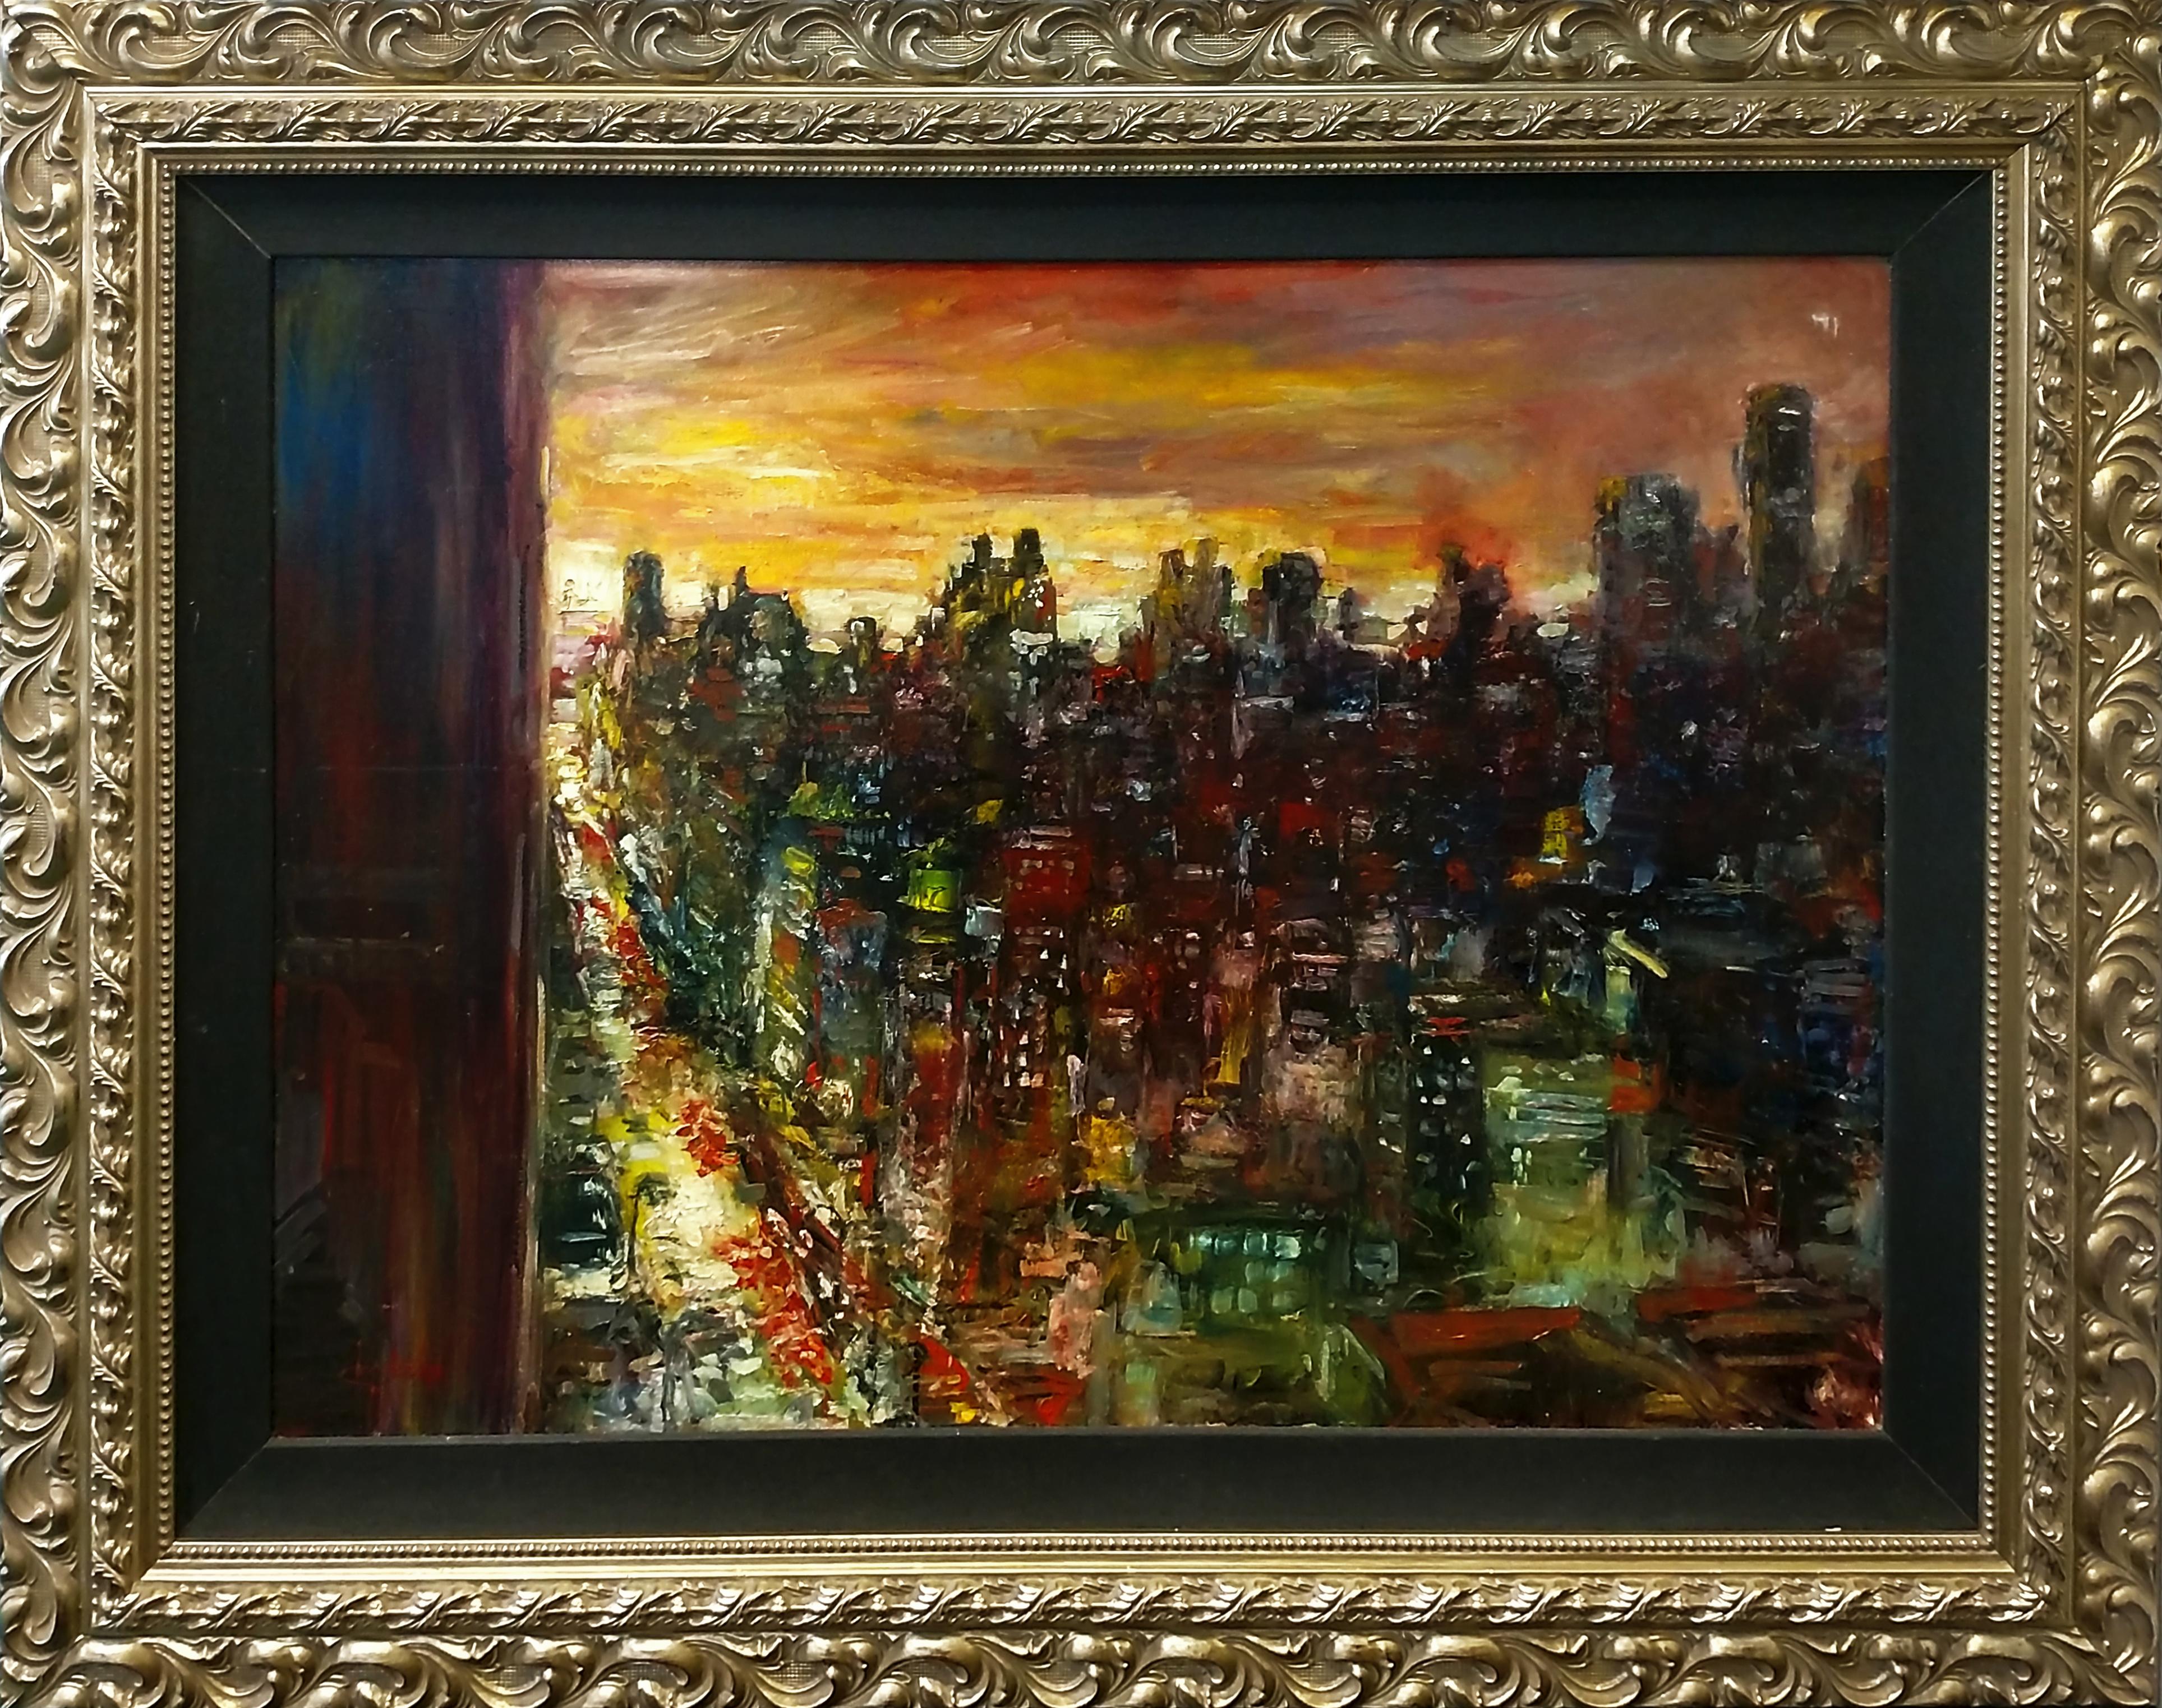 UNTITLED - Painting by Stephen Shortridge